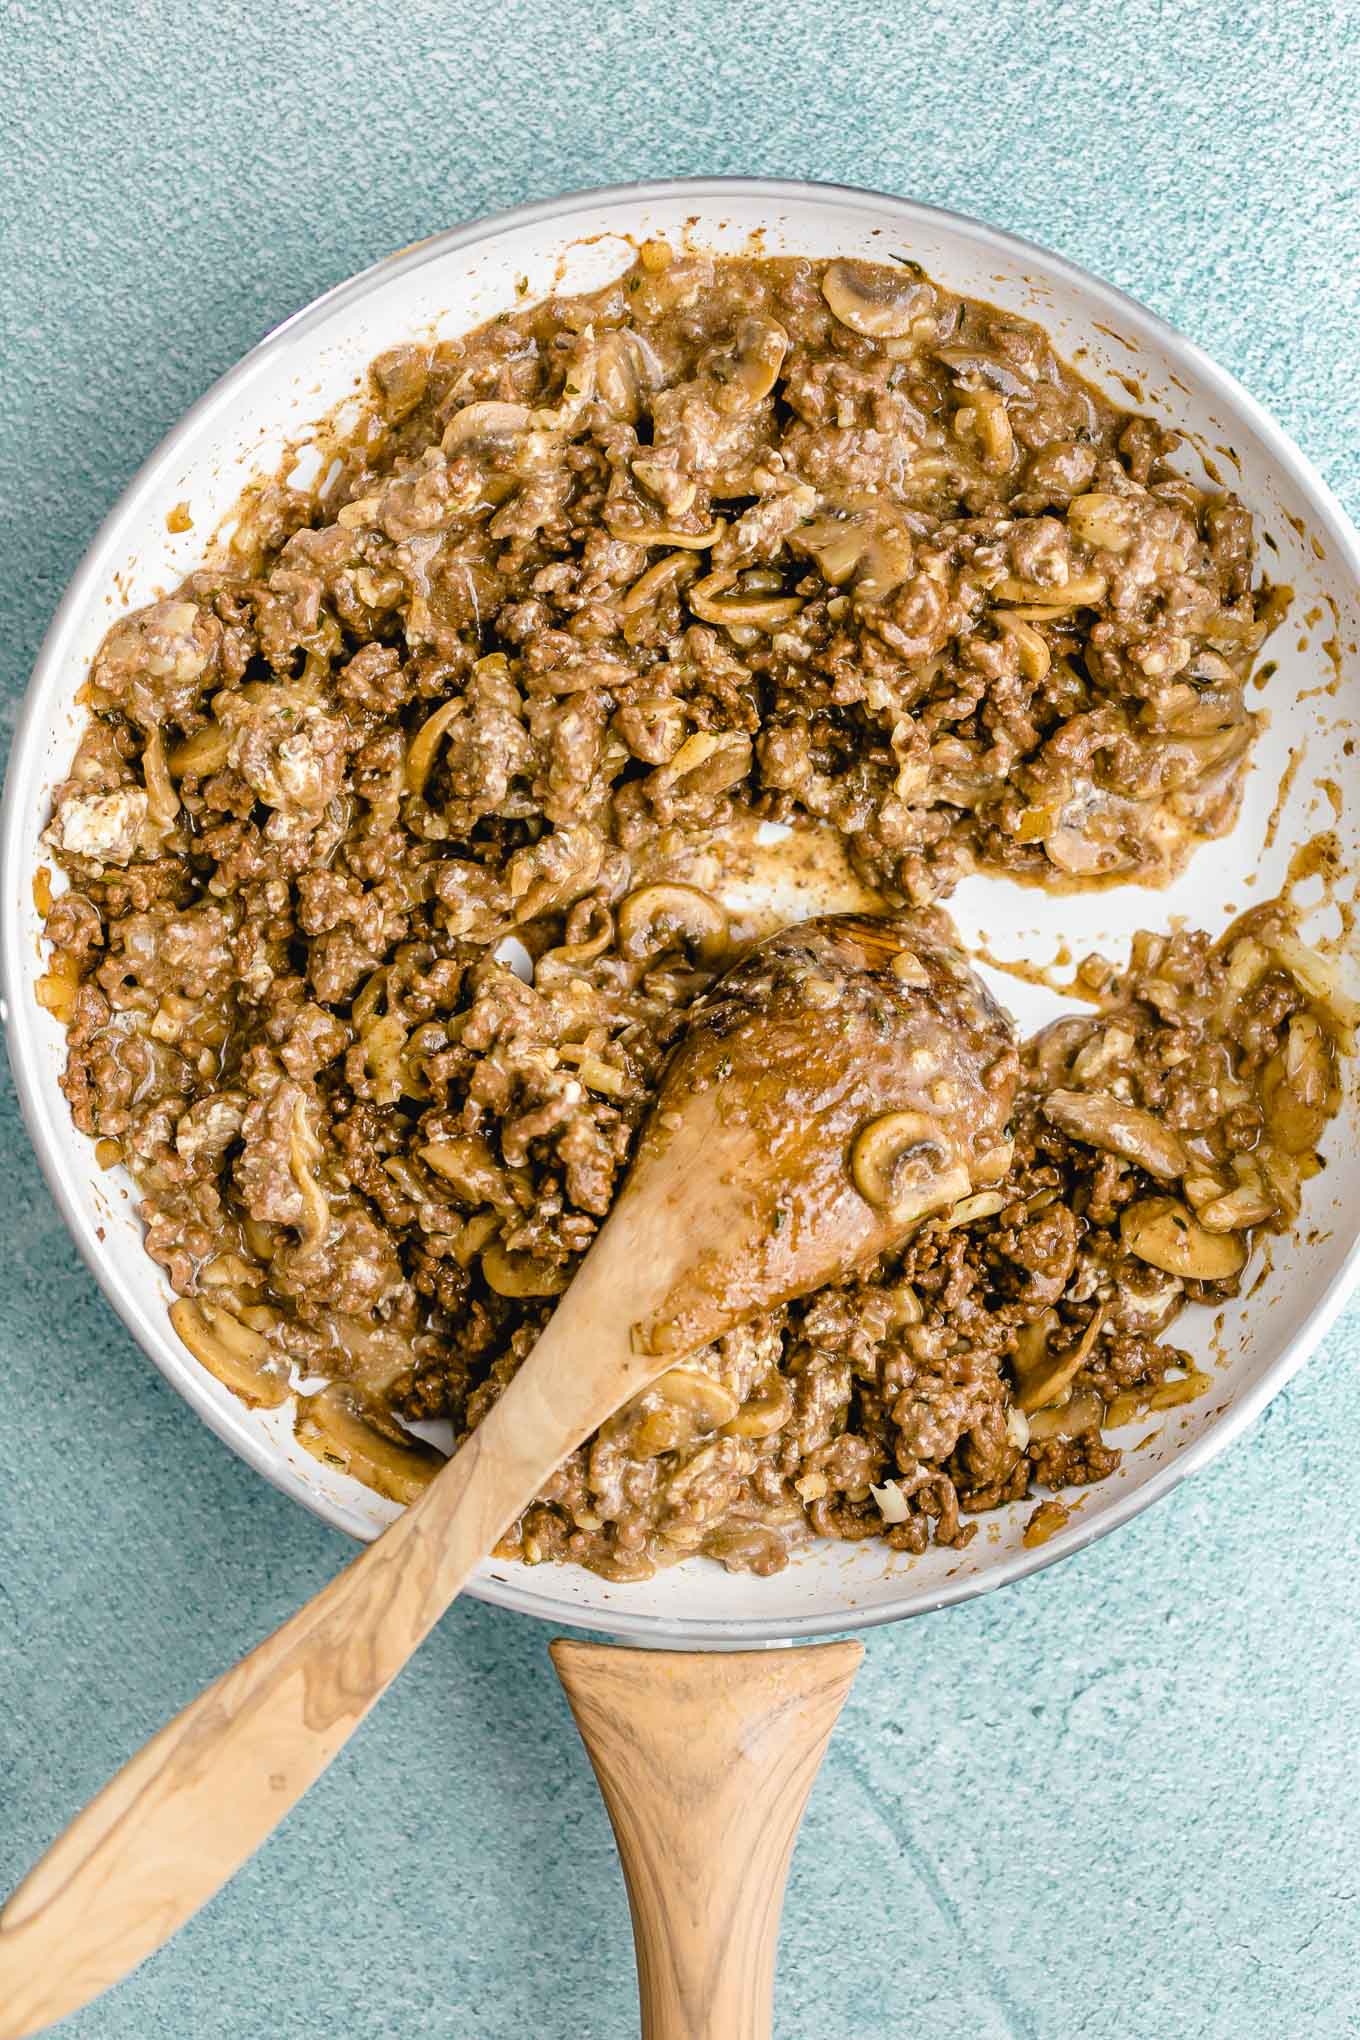 Creamy Cheeseburger Skillet with Mushrooms and Swiss! A deliciously creamy, cheesy, fully-loaded cheeseburger skillet that the whole family will love. Make it in just 30 minutes with ground beef, mushrooms, onions, cream cheese, and Swiss cheese. 